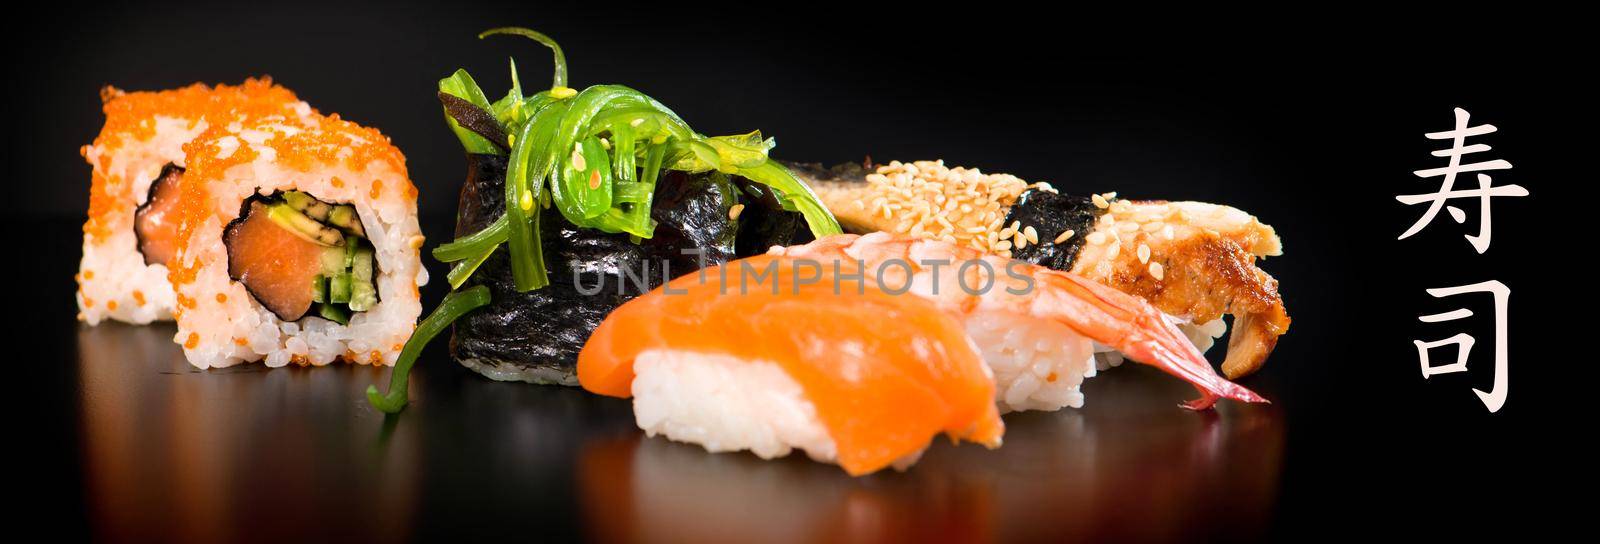 Sushi and Rolls closeup on black background